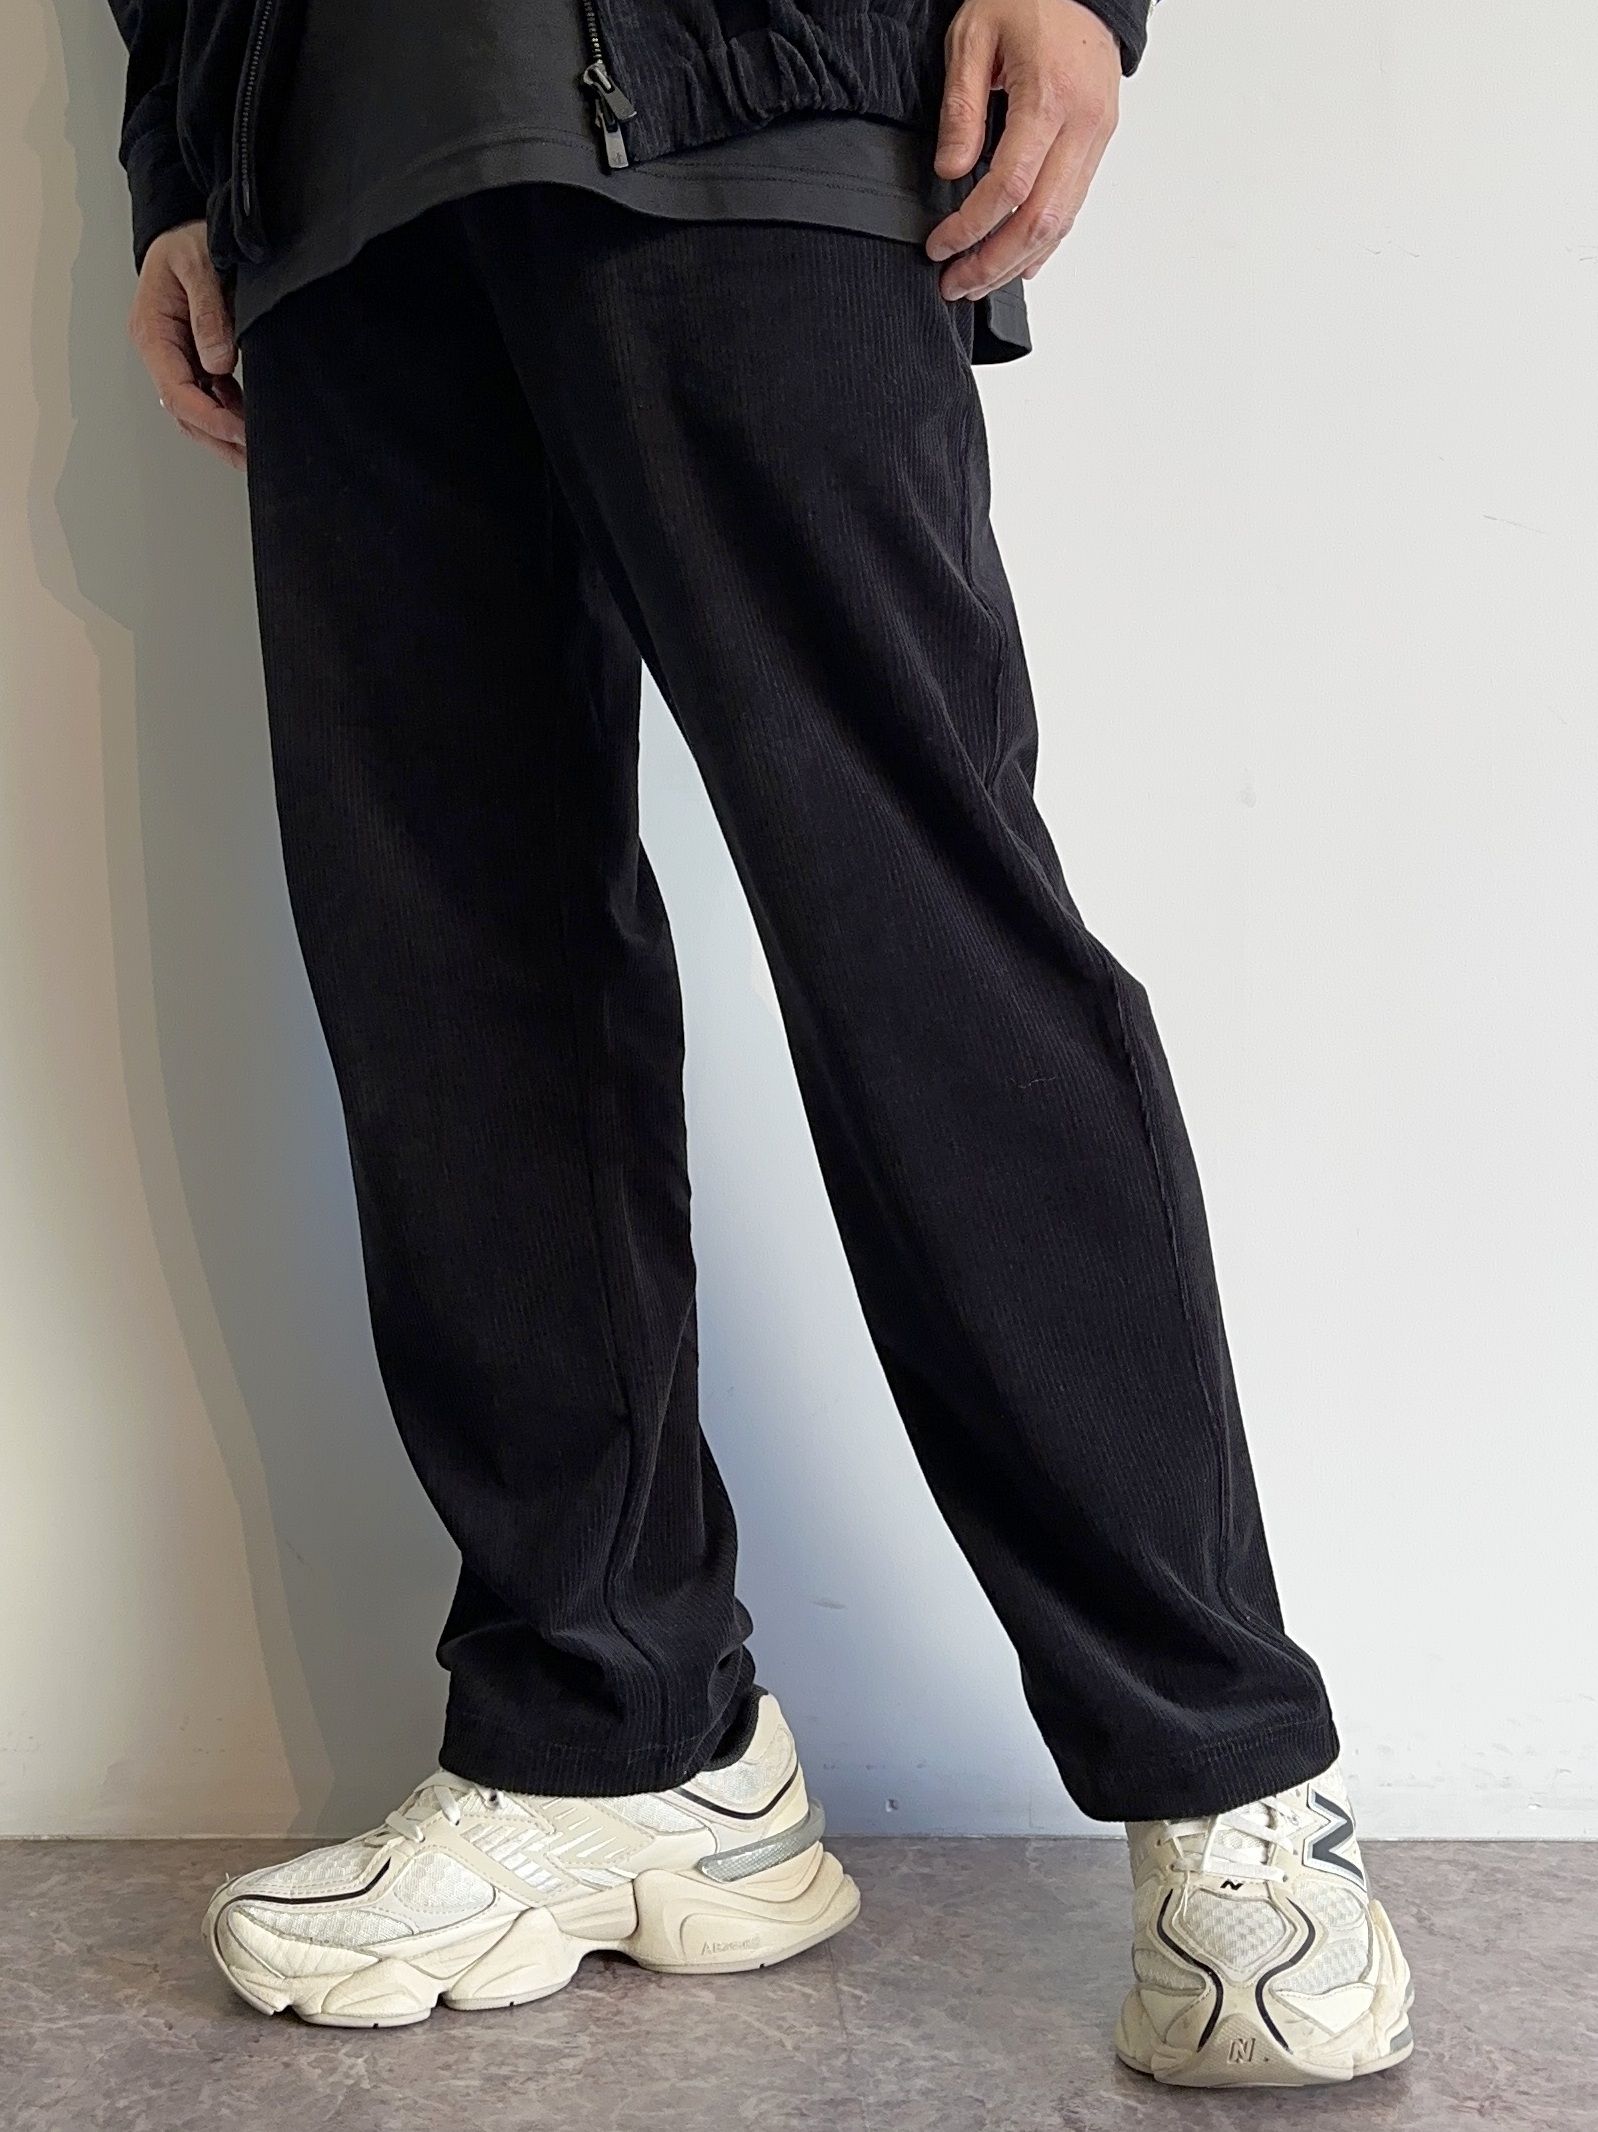 RESOUND CLOTHING - CHRIS EASY WIDE PANTS / RC29-ST-016W